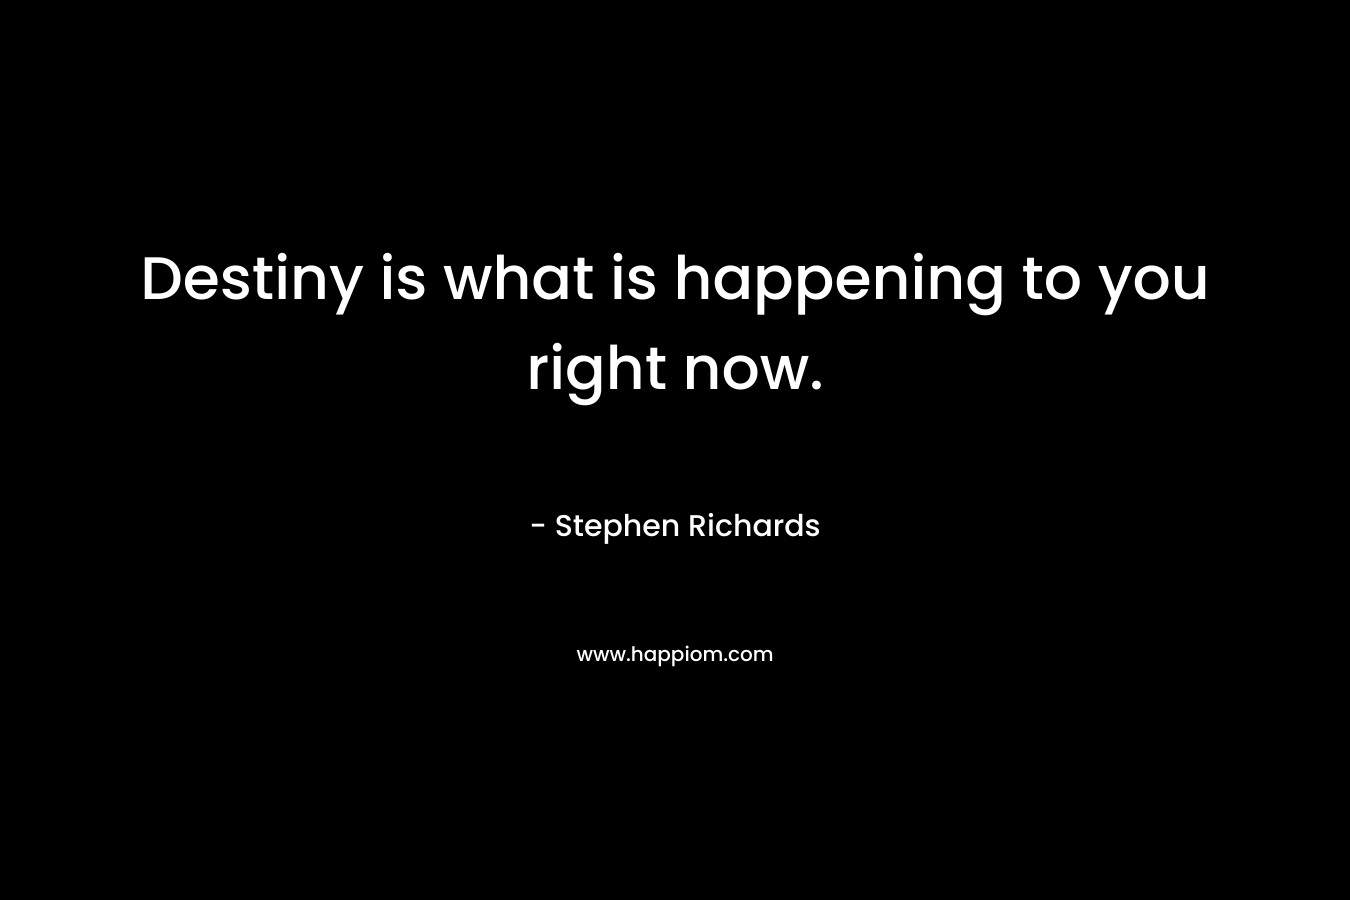 Destiny is what is happening to you right now.